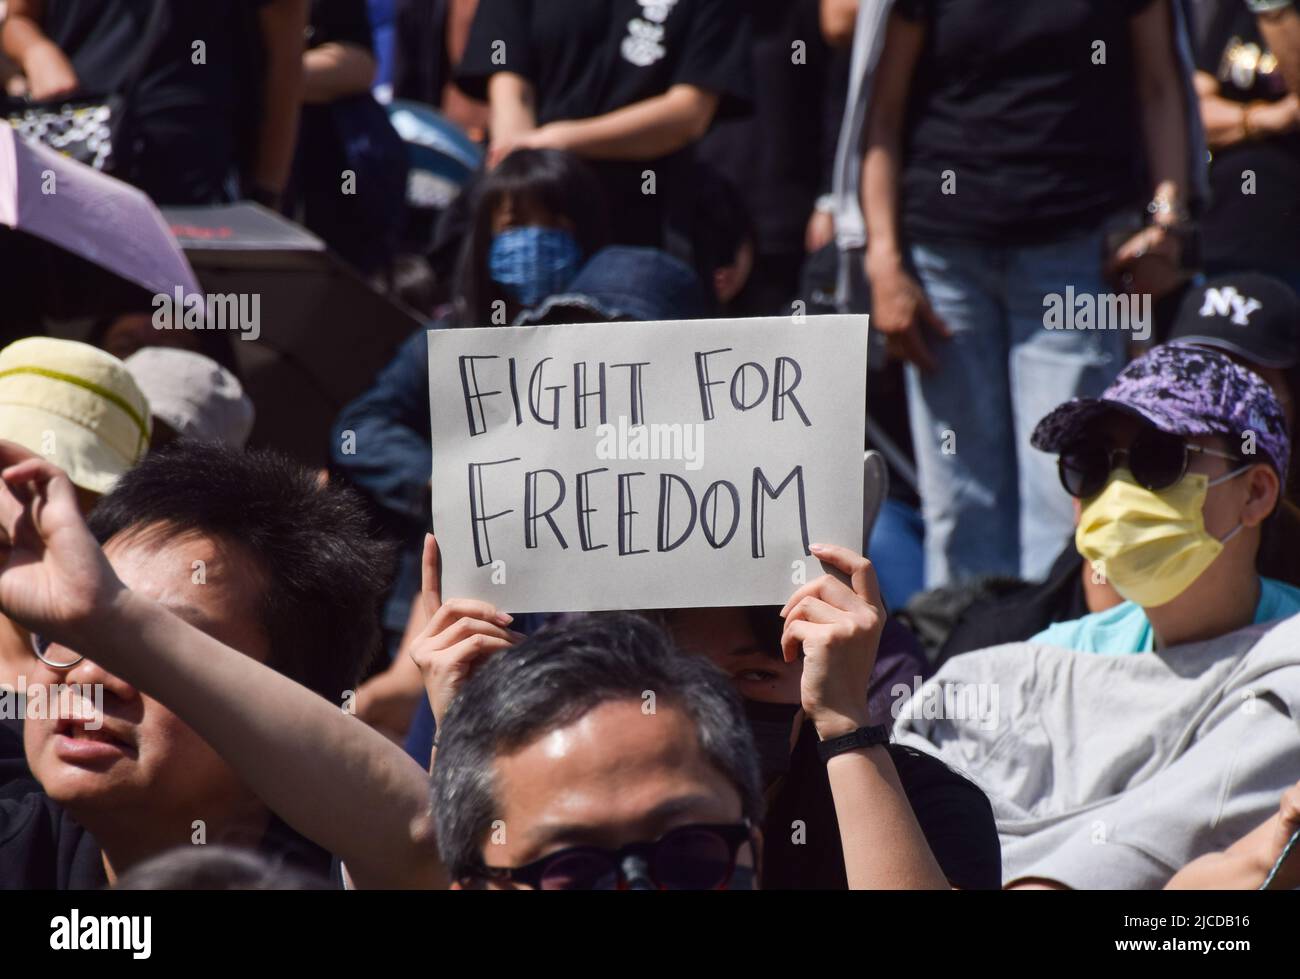 London, UK. 12th June 2022. Thousands of Hong Kongers gathered in Parliament Square to mark the third anniversary of the brutal crackdown of the Hong Kong protests by the Chinese Government. Credit: Vuk Valcic/Alamy Live News Stock Photo